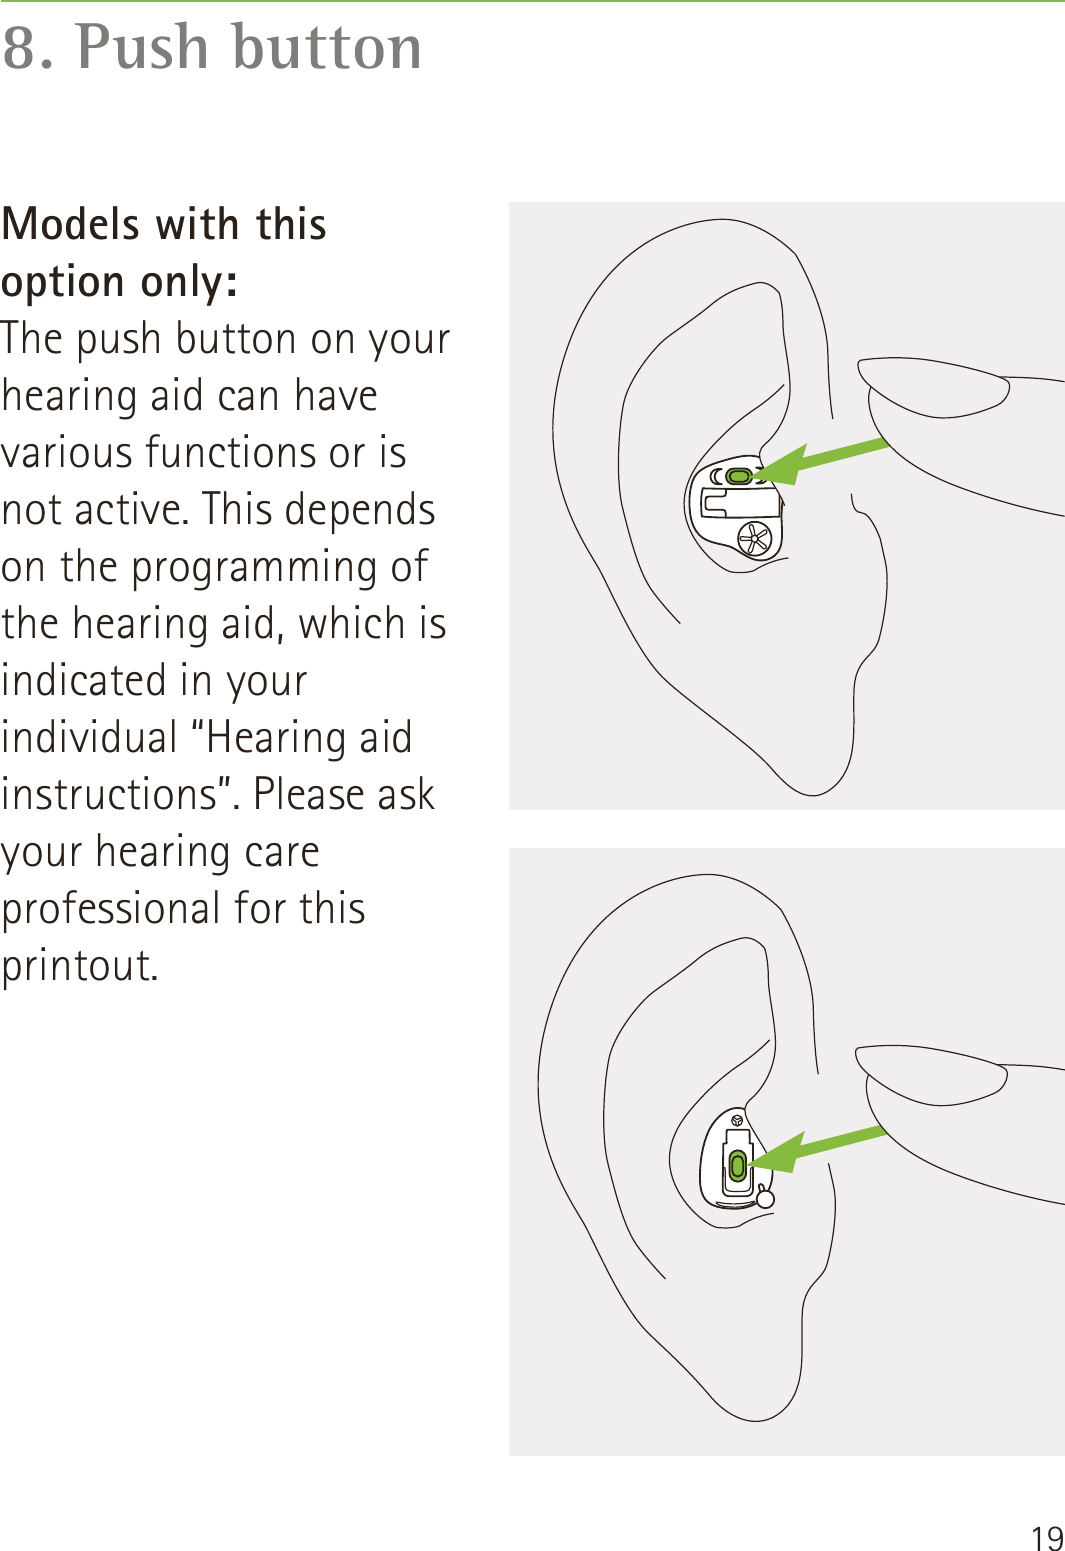 198. Push buttonModels with this  option only: The push button on your hearing aid can have various functions or is not active. This depends on the programming of the hearing aid, which is indicated in your individual “Hearing aid instructions”. Please ask your hearing care professional for this printout.